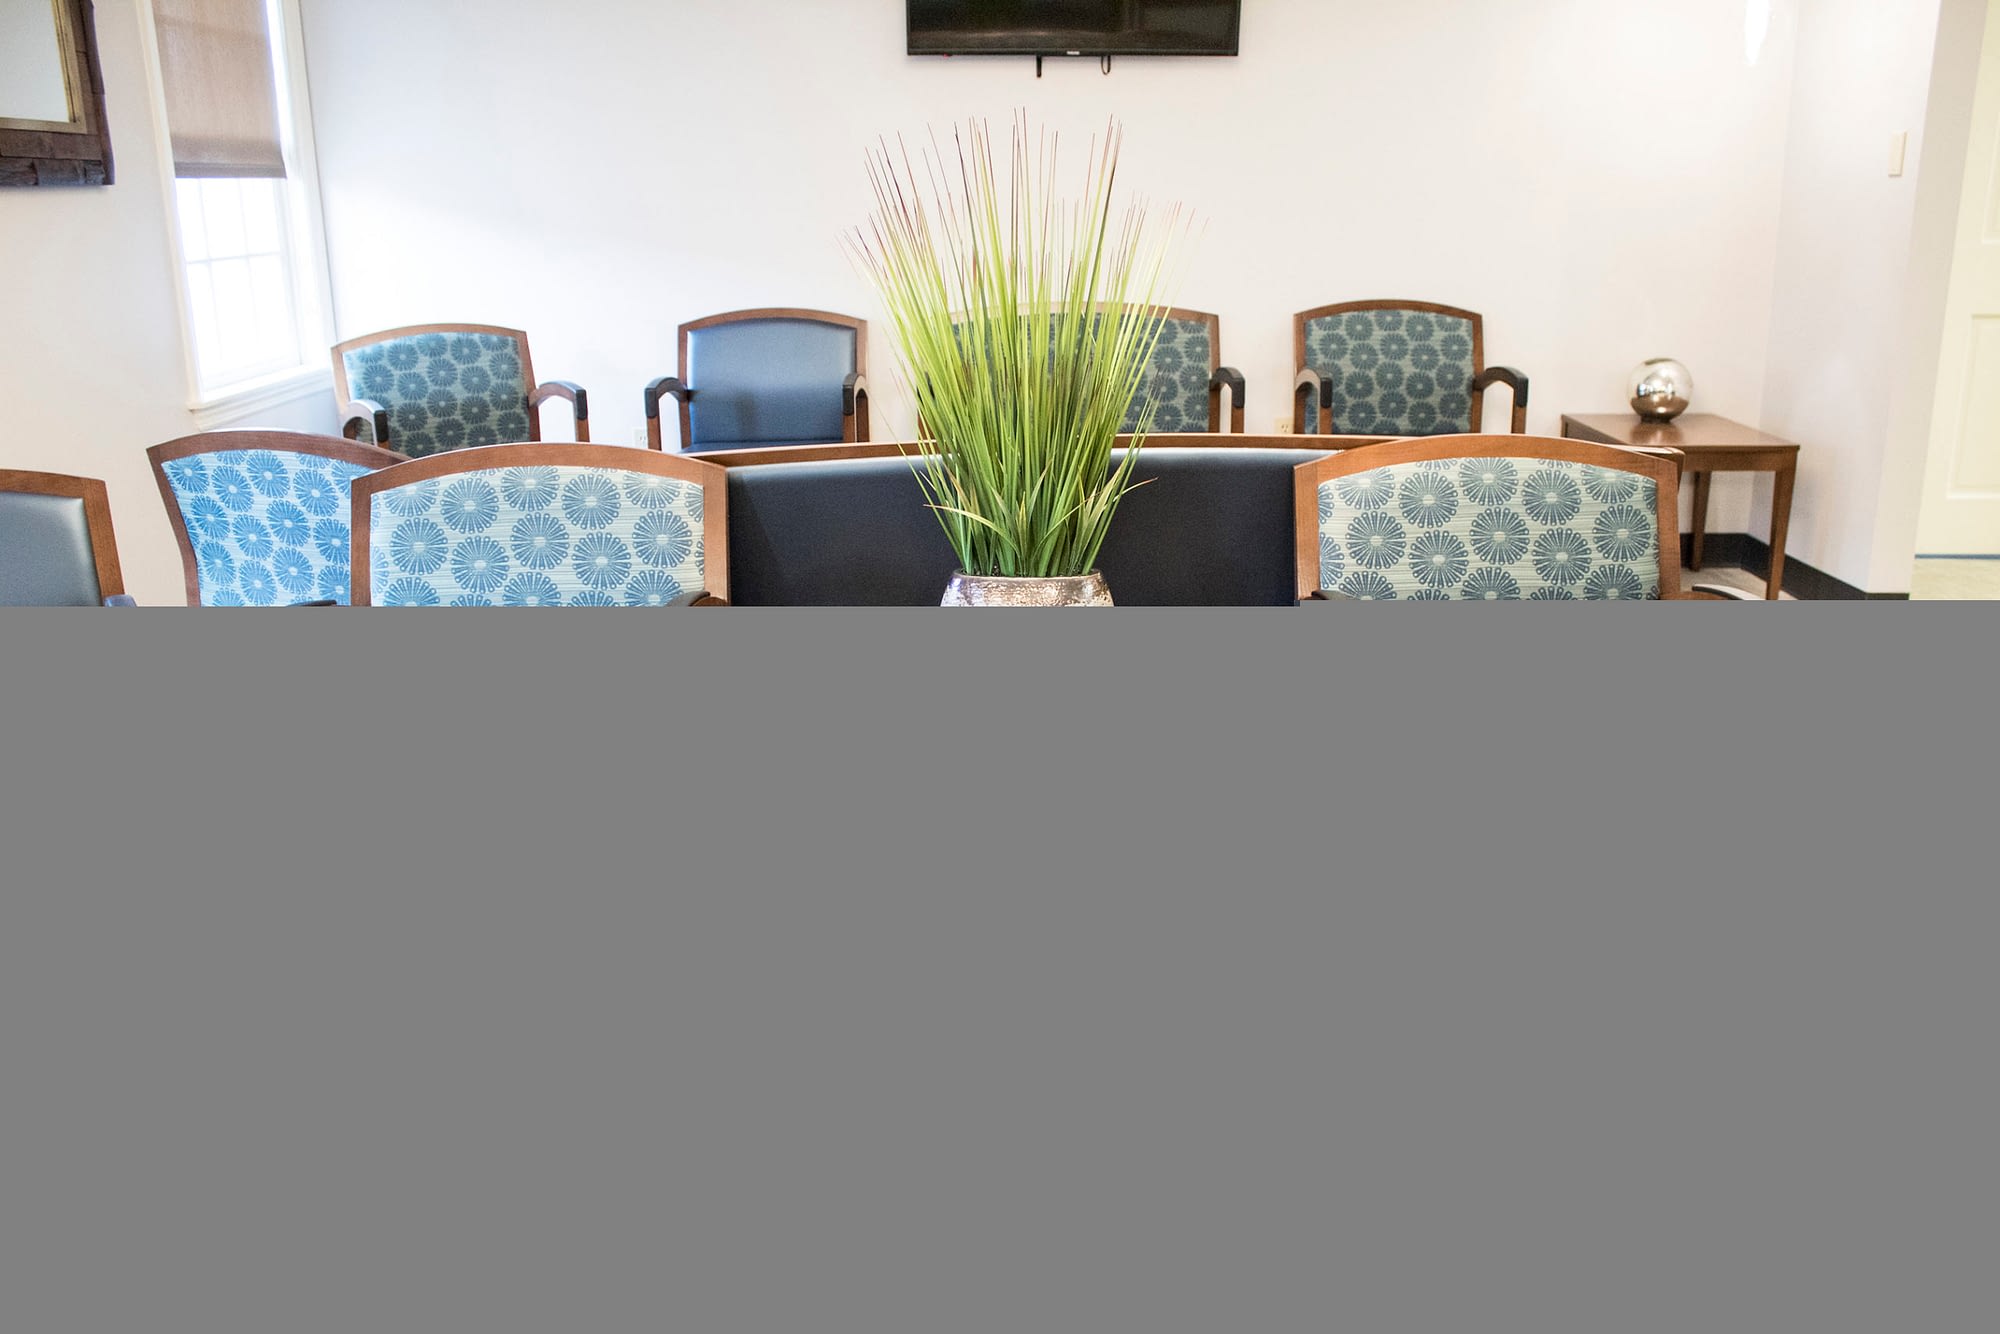 Two Chairs and Table in Waiting Room